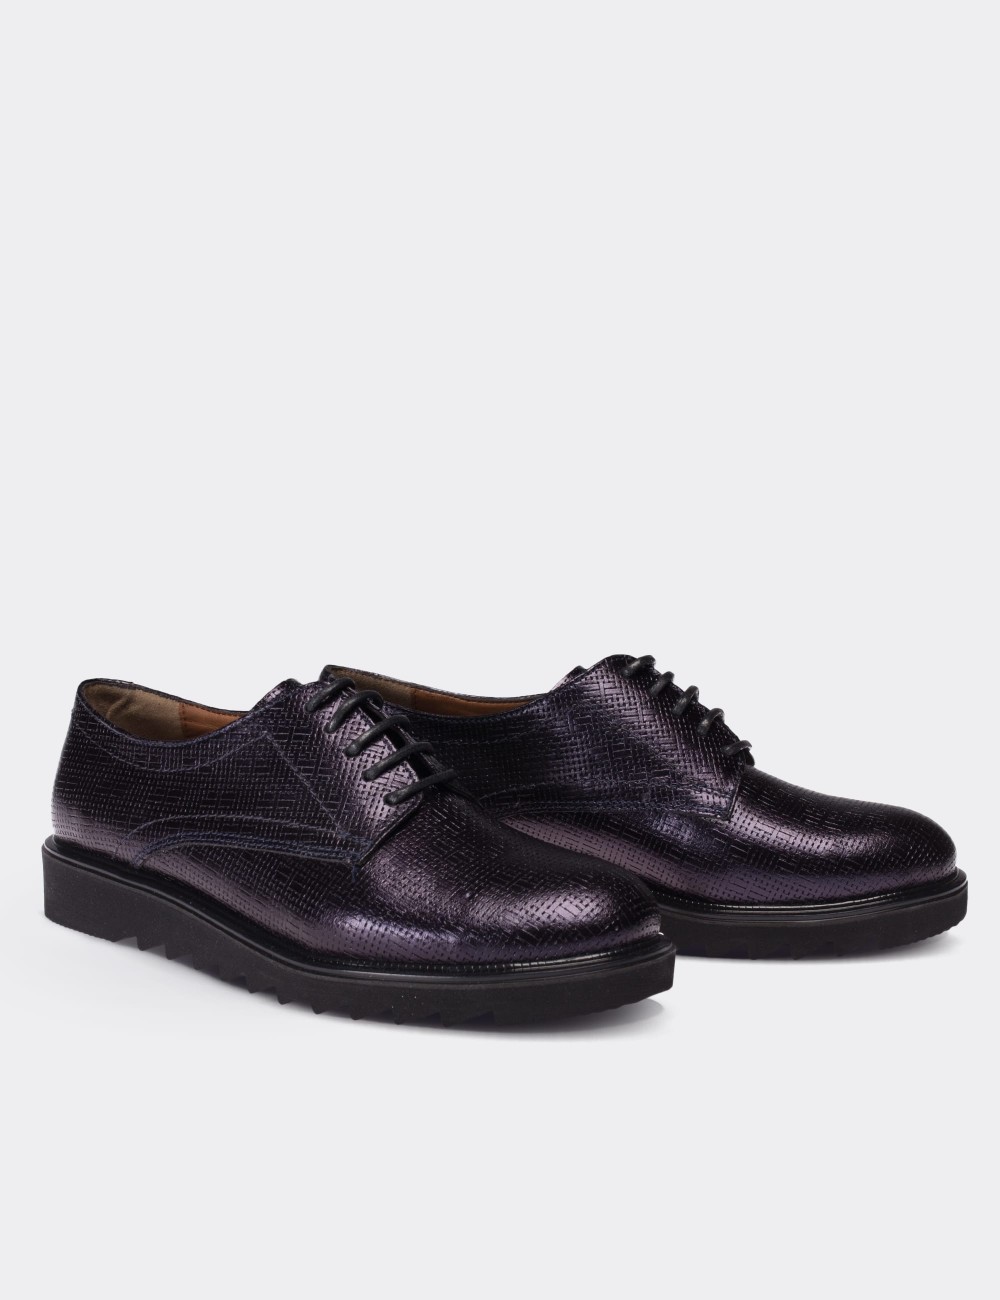 Purple  Leather Lace-up Oxford Shoes - 01430ZMORE04